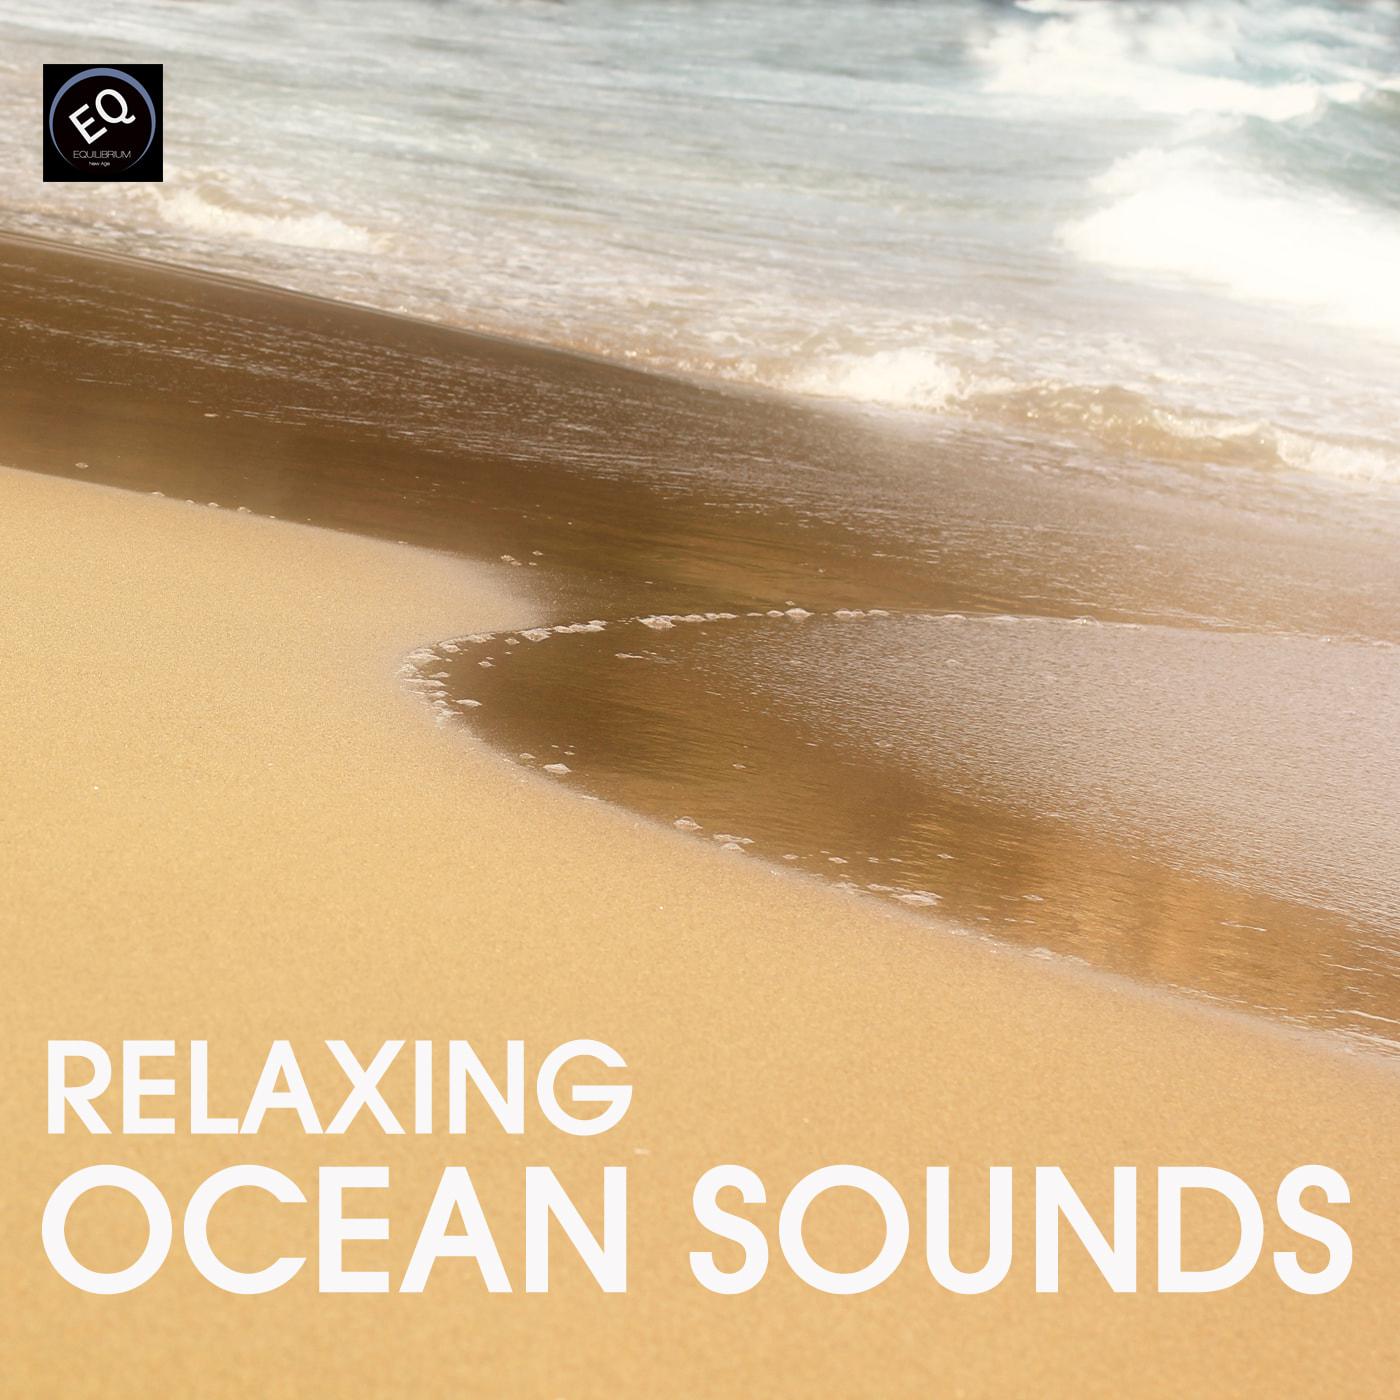 Ocean Waves 3 - Tropical Ocean Waves and Crickets for Relaxation and Dreaming. Ocean Sounds for Pure Tranquility Surface Waves